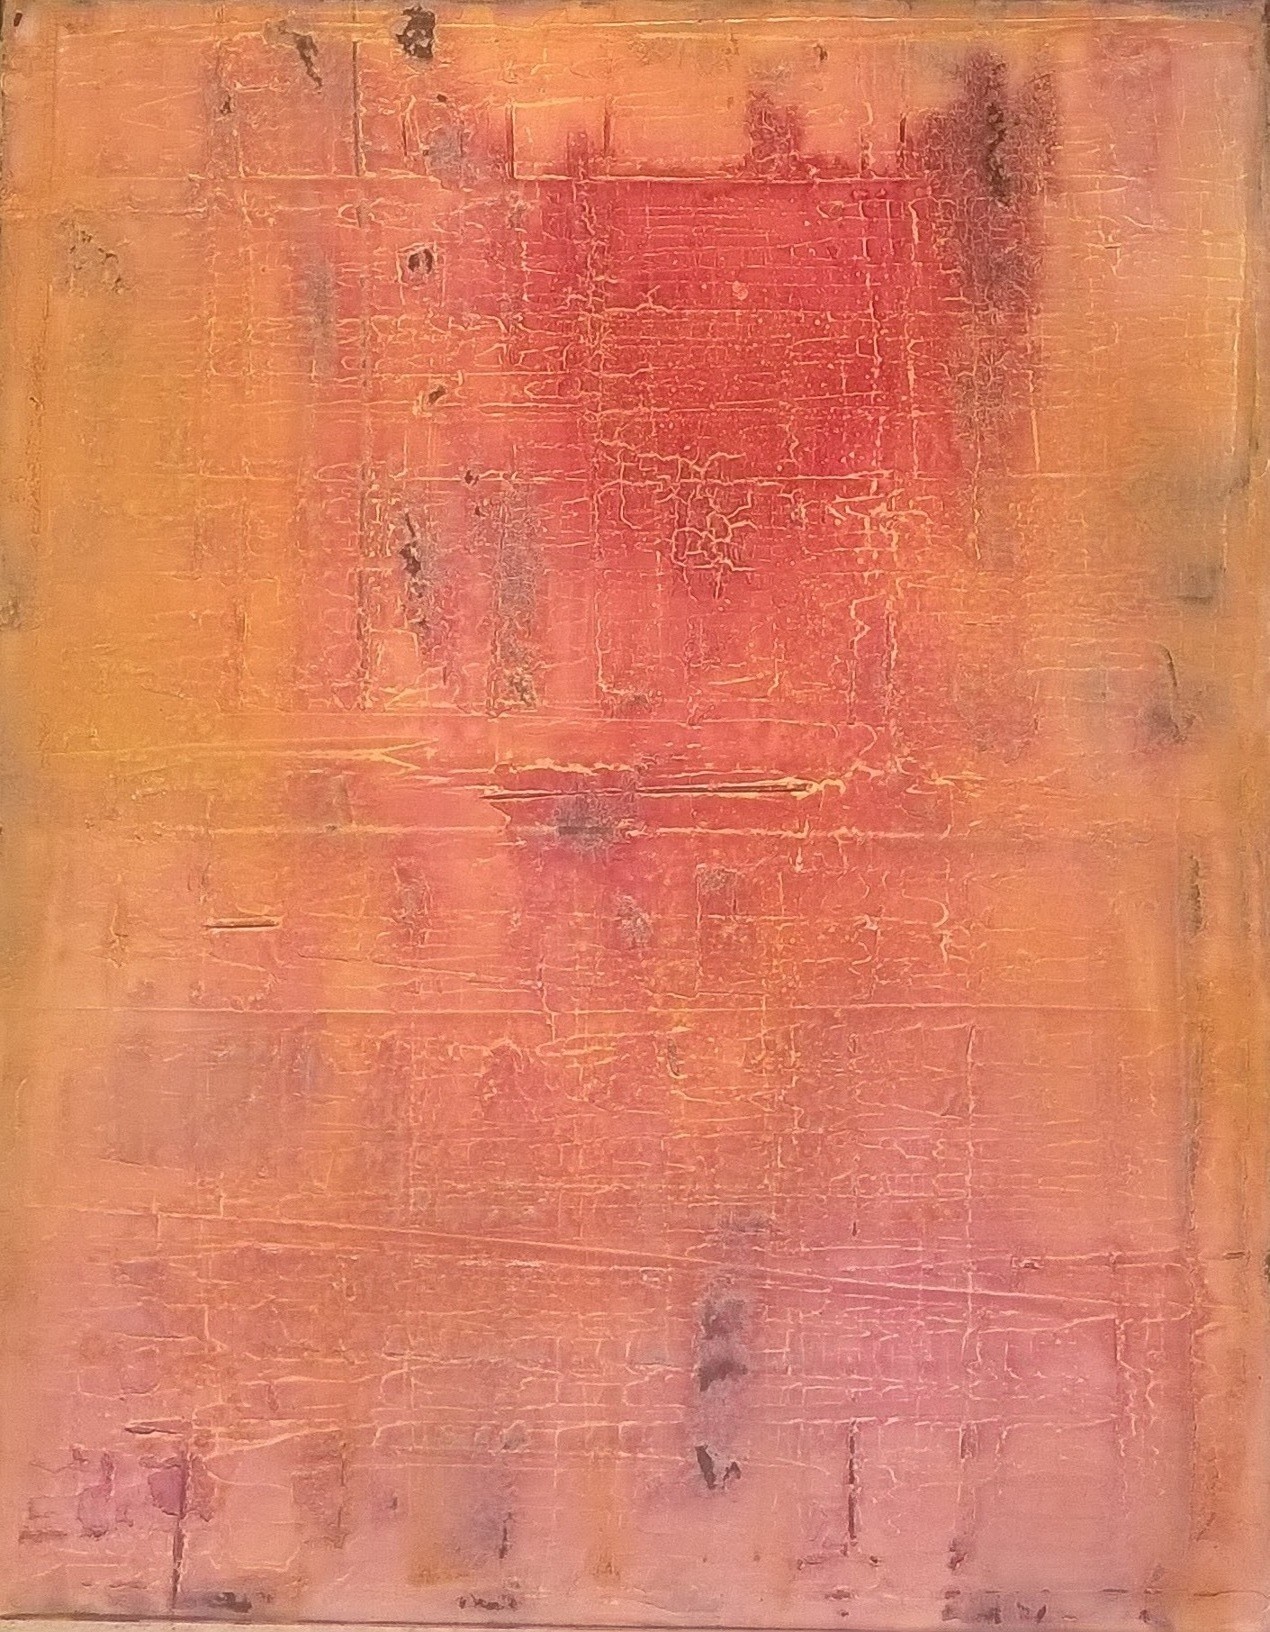 Dégradation 38, Painting by Chax | Artmajeur